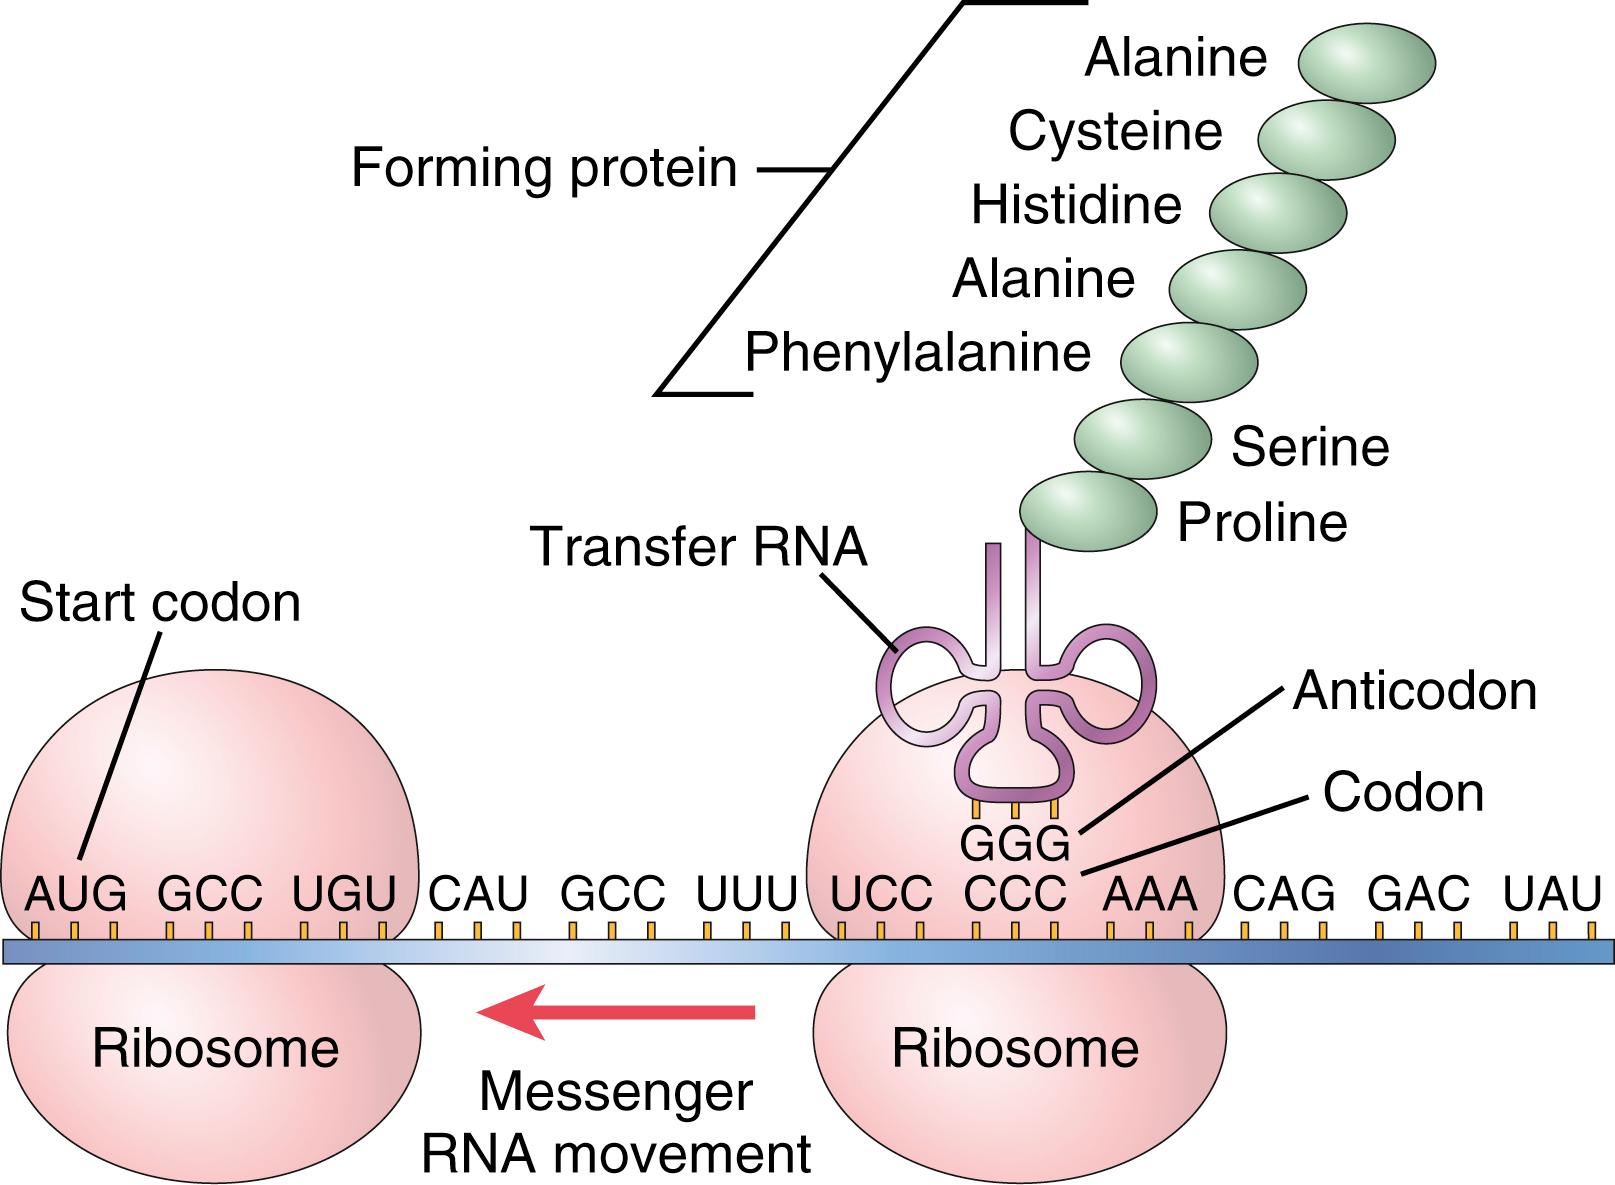 Figure 3-9., A messenger RNA strand is moving through two ribosomes. As each codon passes through, an amino acid is added to the growing protein chain, which is shown in the right-hand ribosome. The transfer RNA molecule transports each specific amino acid to the newly forming protein.